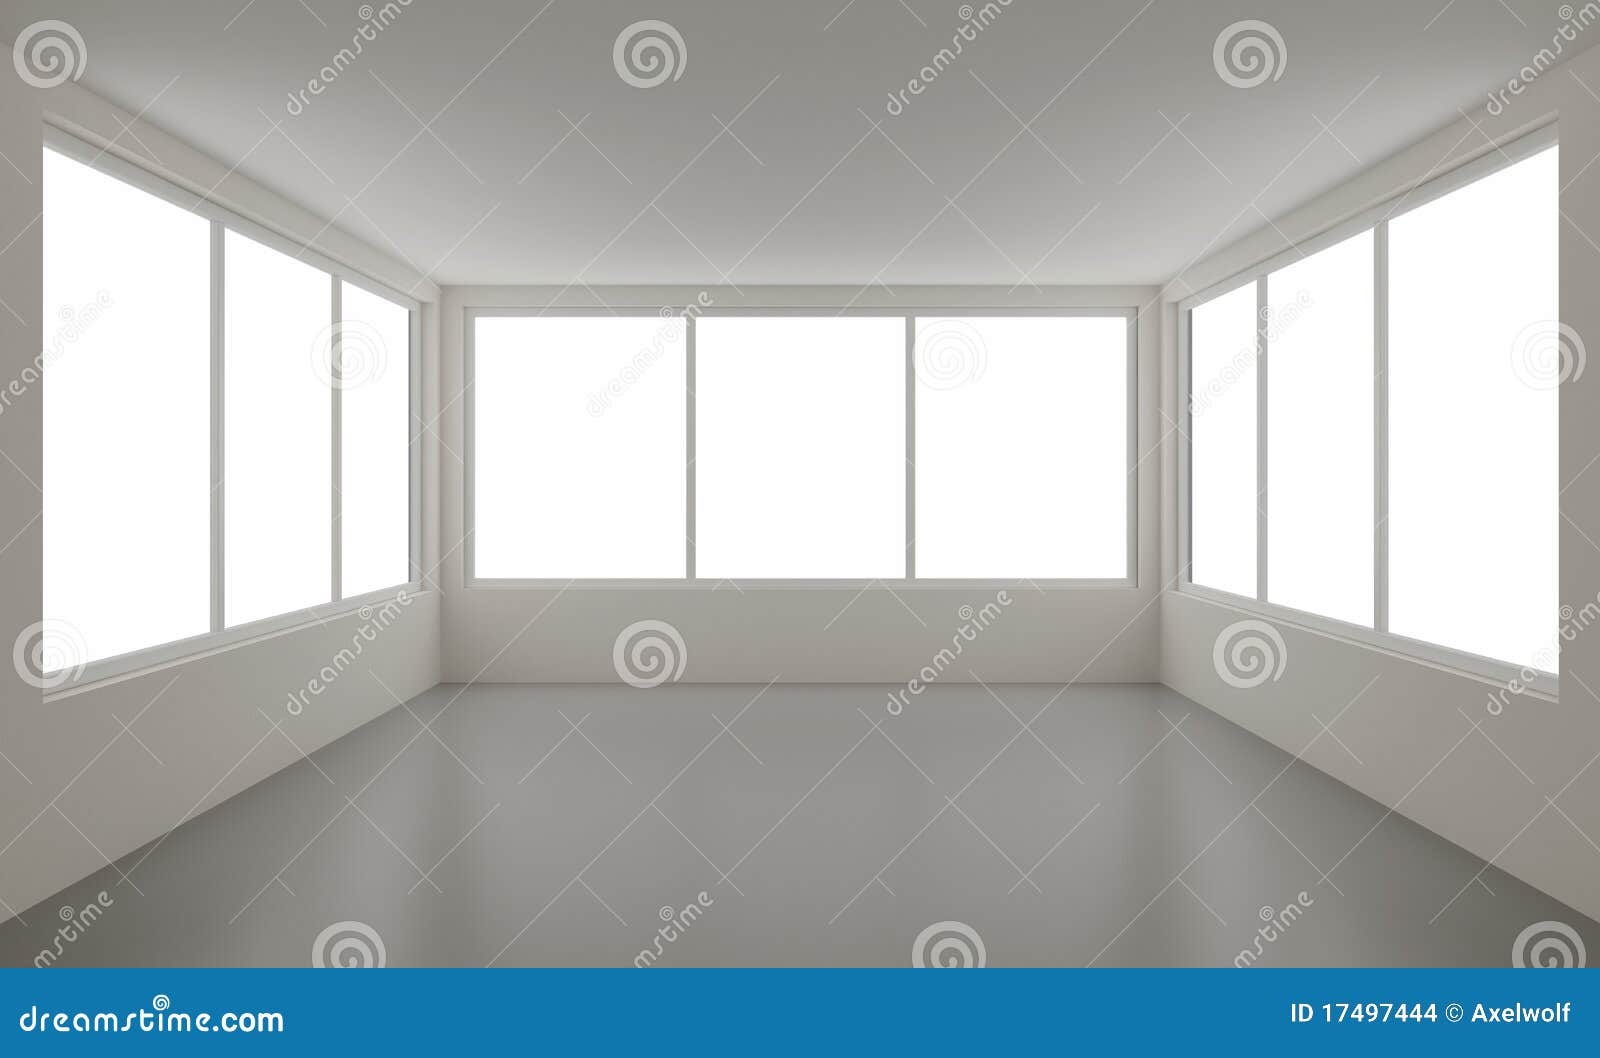 New Clean Interior With Clipping Path For Windows Stock